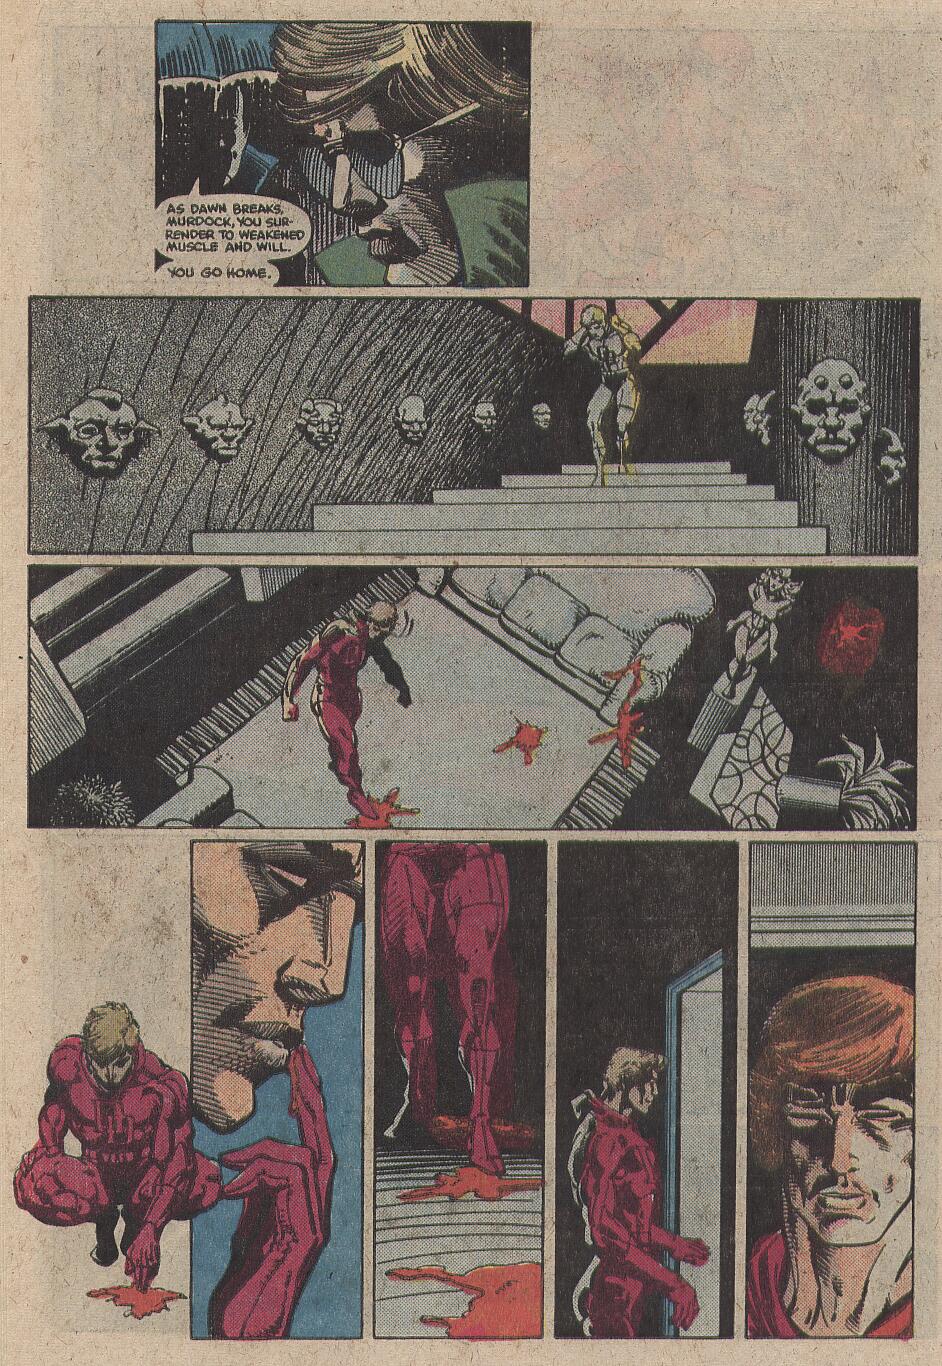 What If? (1977) issue 35 - Elektra had lived - Page 12